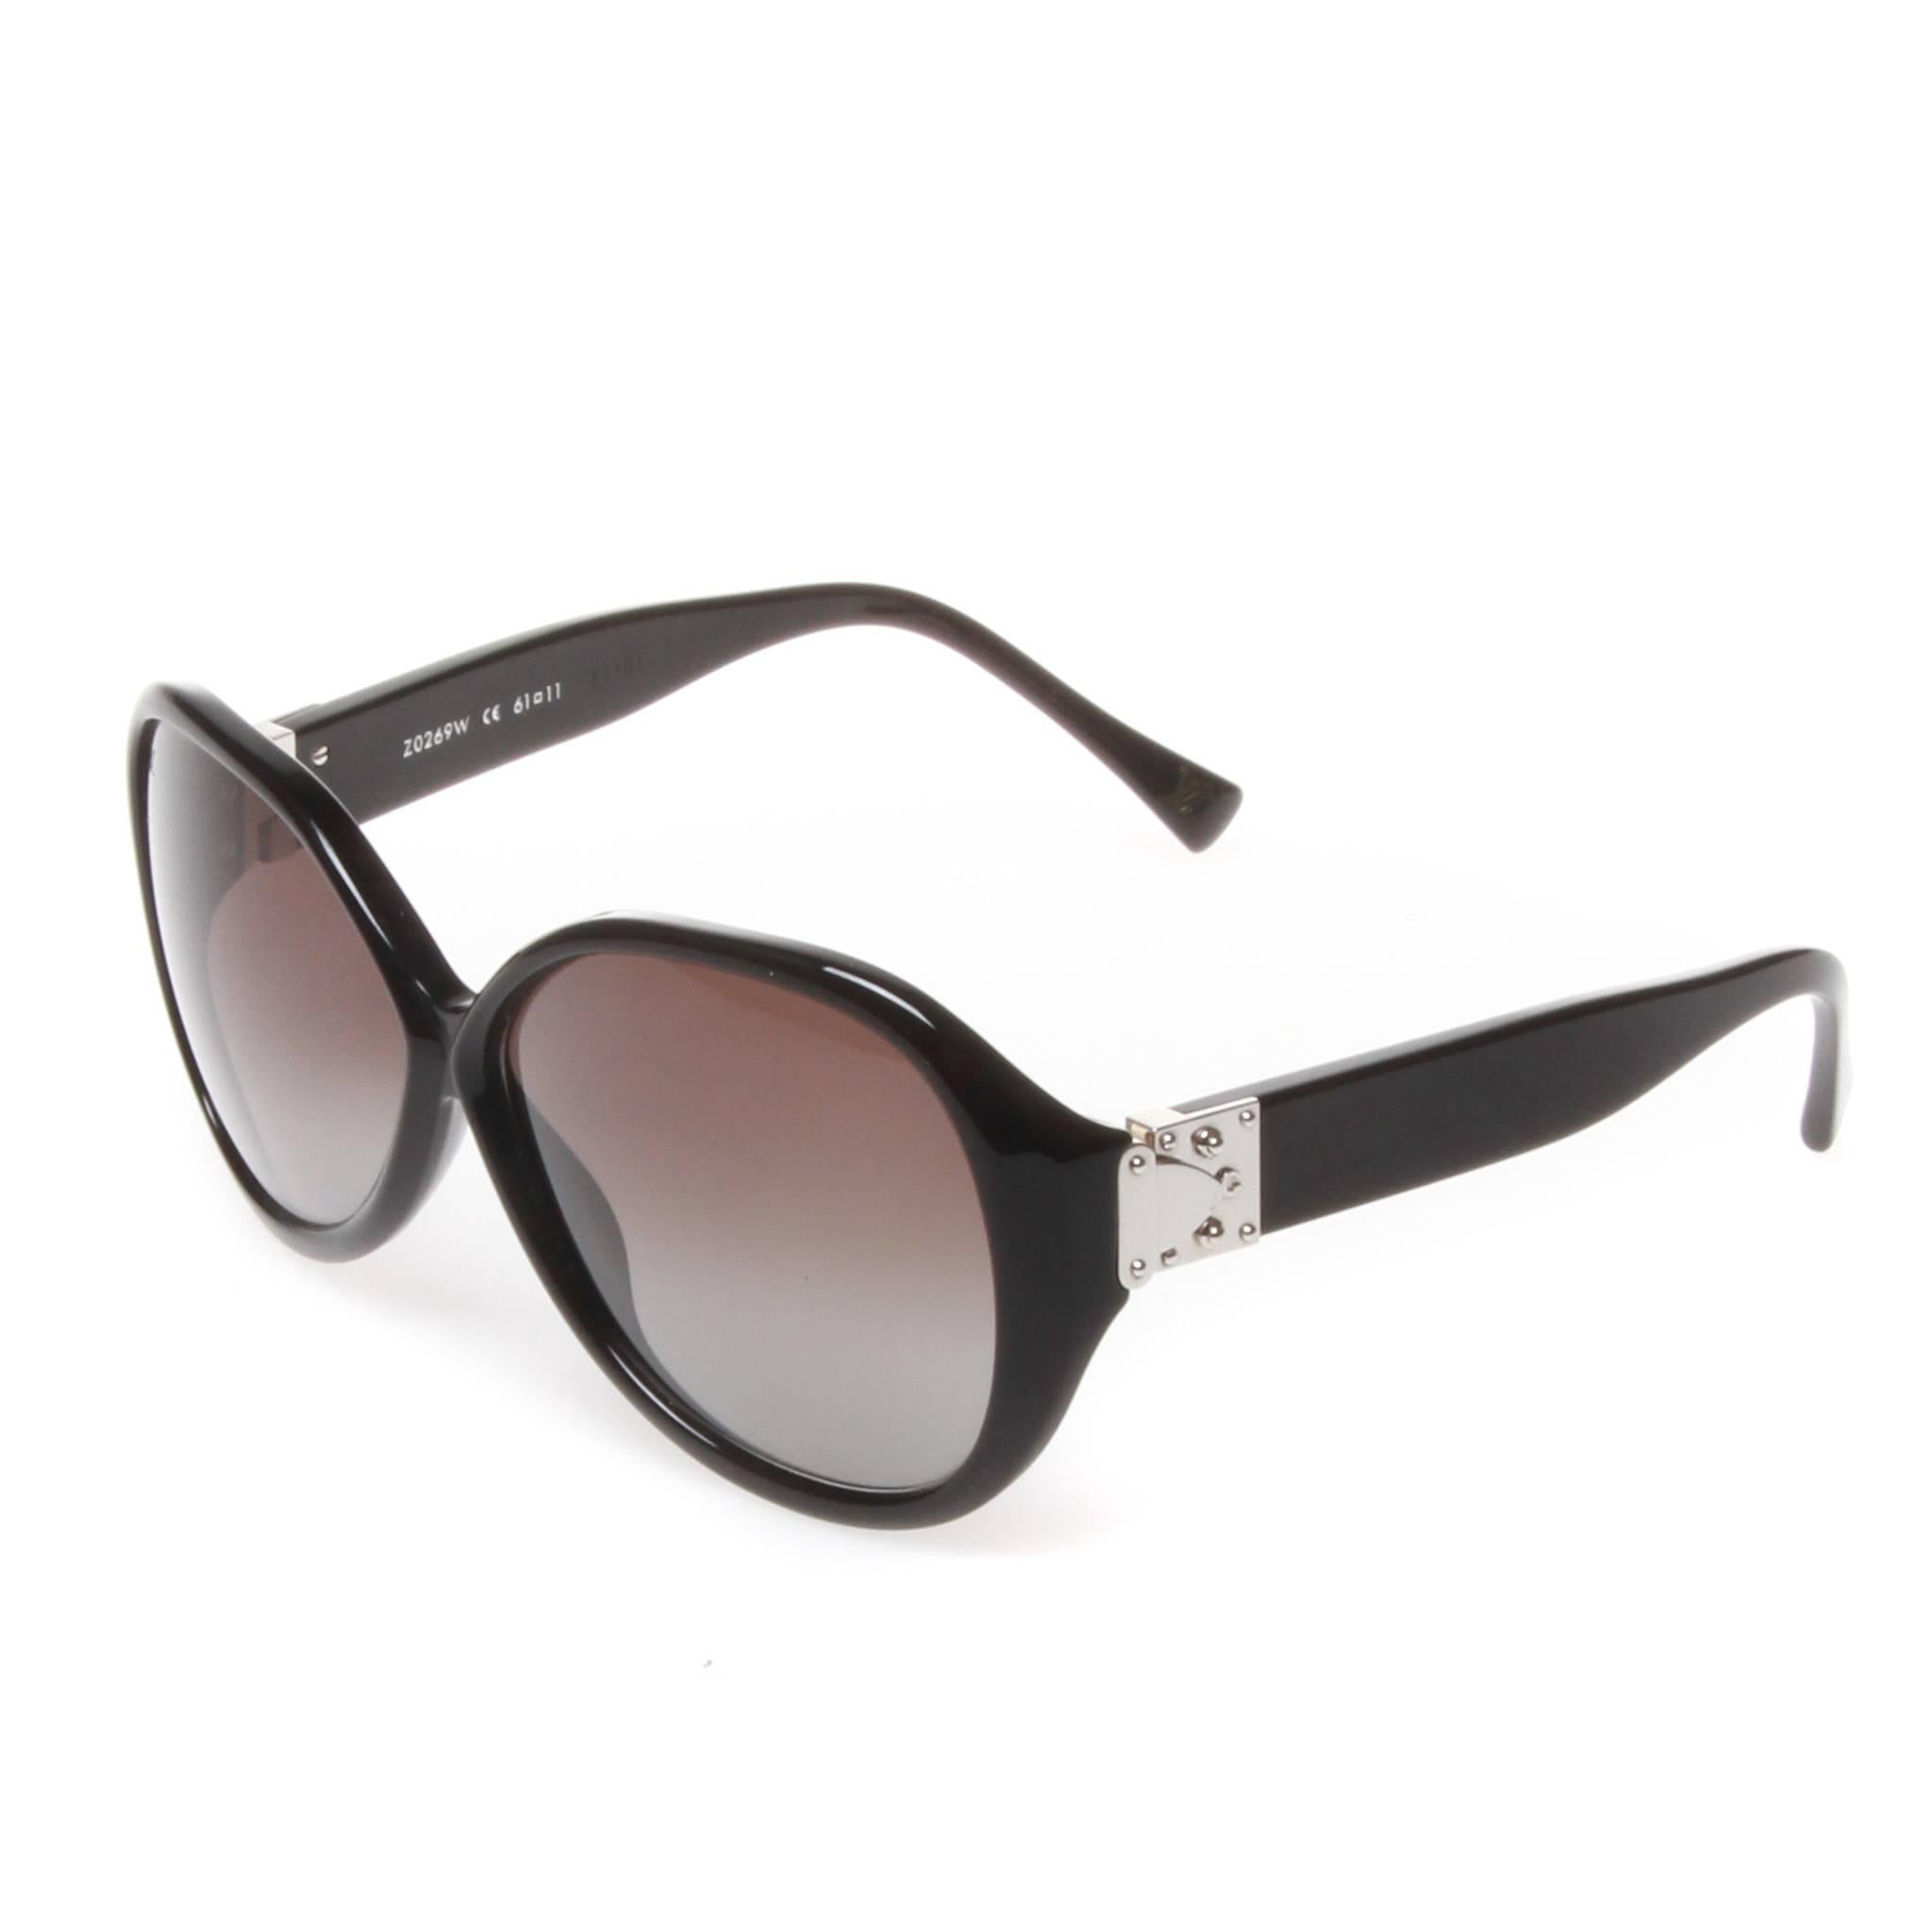 Louis Vuitton Soupçon oversized sunglasses in a black lightly glittered LV-exclusive three-layer acetate. Featuring the soupçon line's S-lock hinge design inspired by LV luggage in silver tone. The gradient tinted lenses provide 100% UV